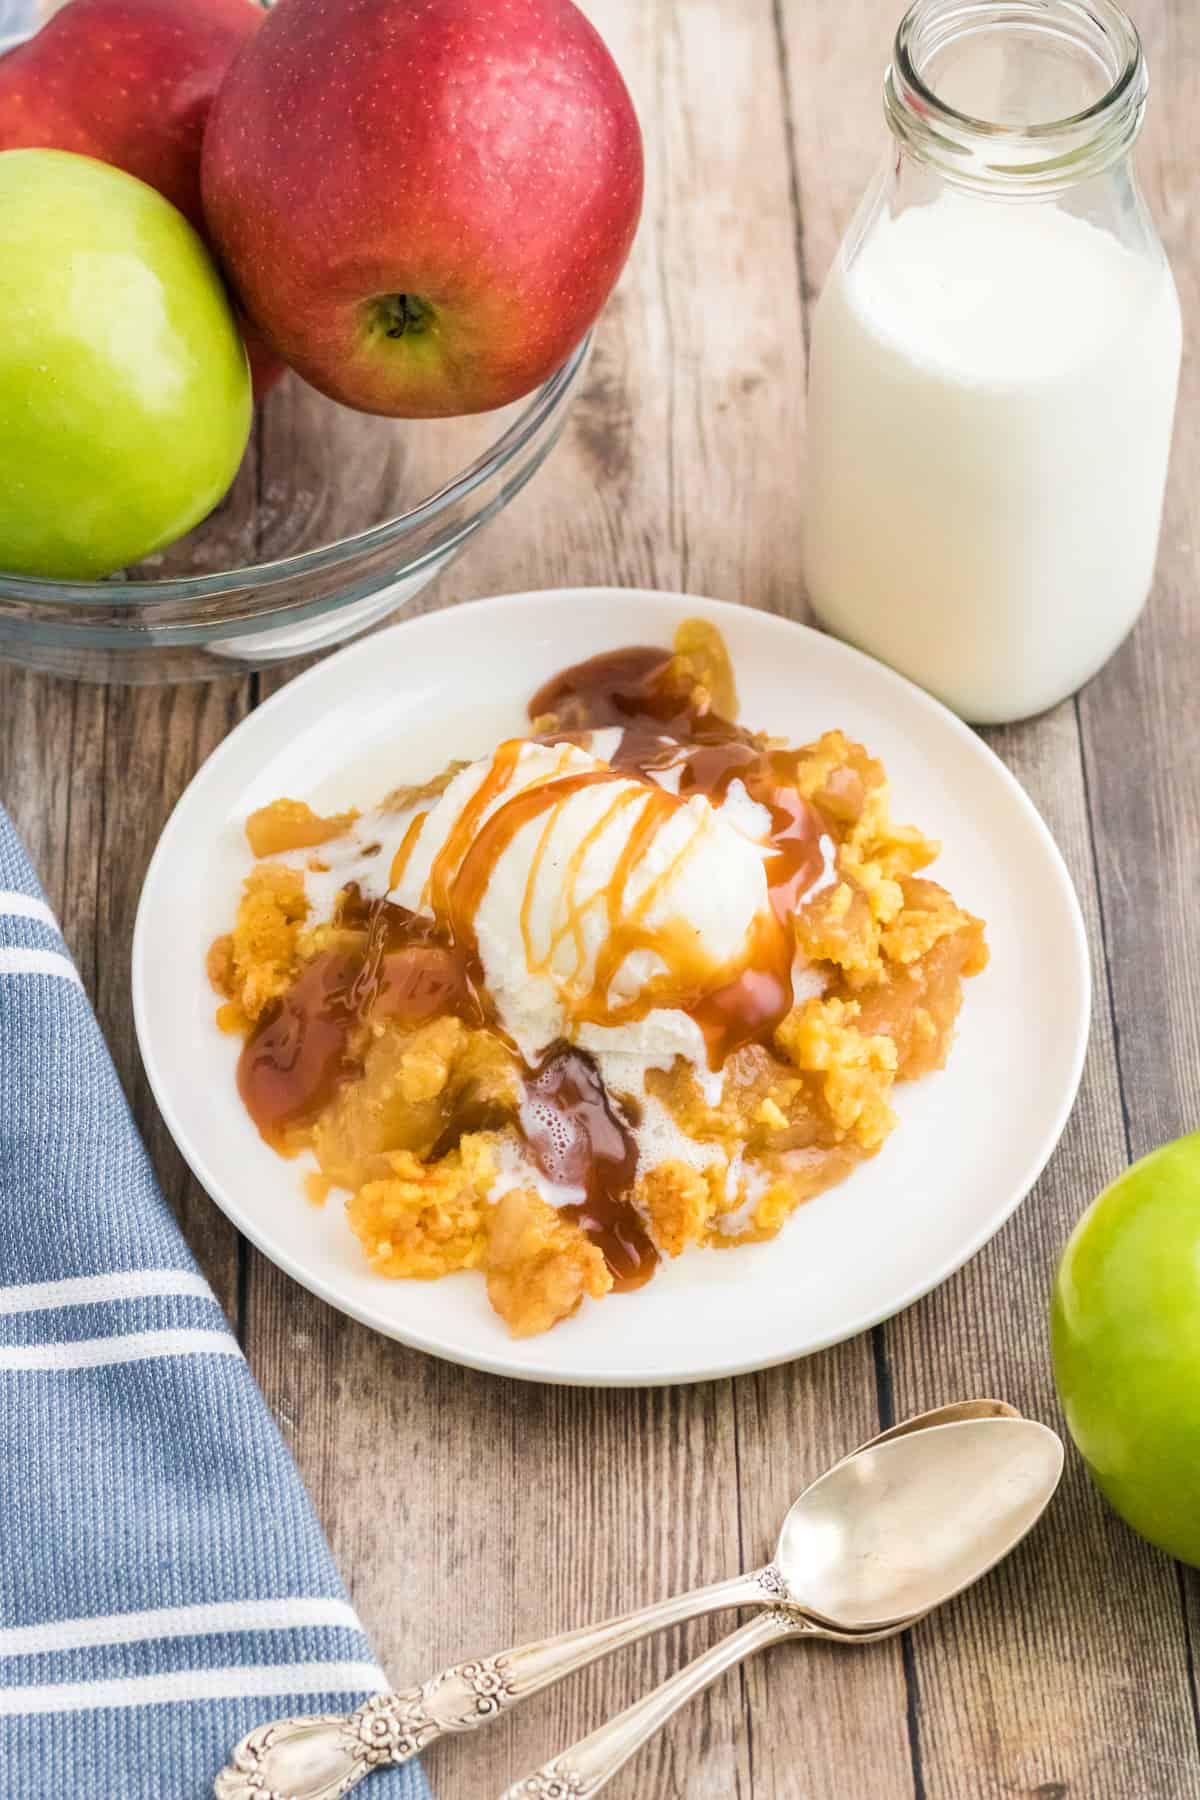 Apple dump cake topped with vanilla ice cream and caramel sauce. Glass of milk and apples are next to plate.